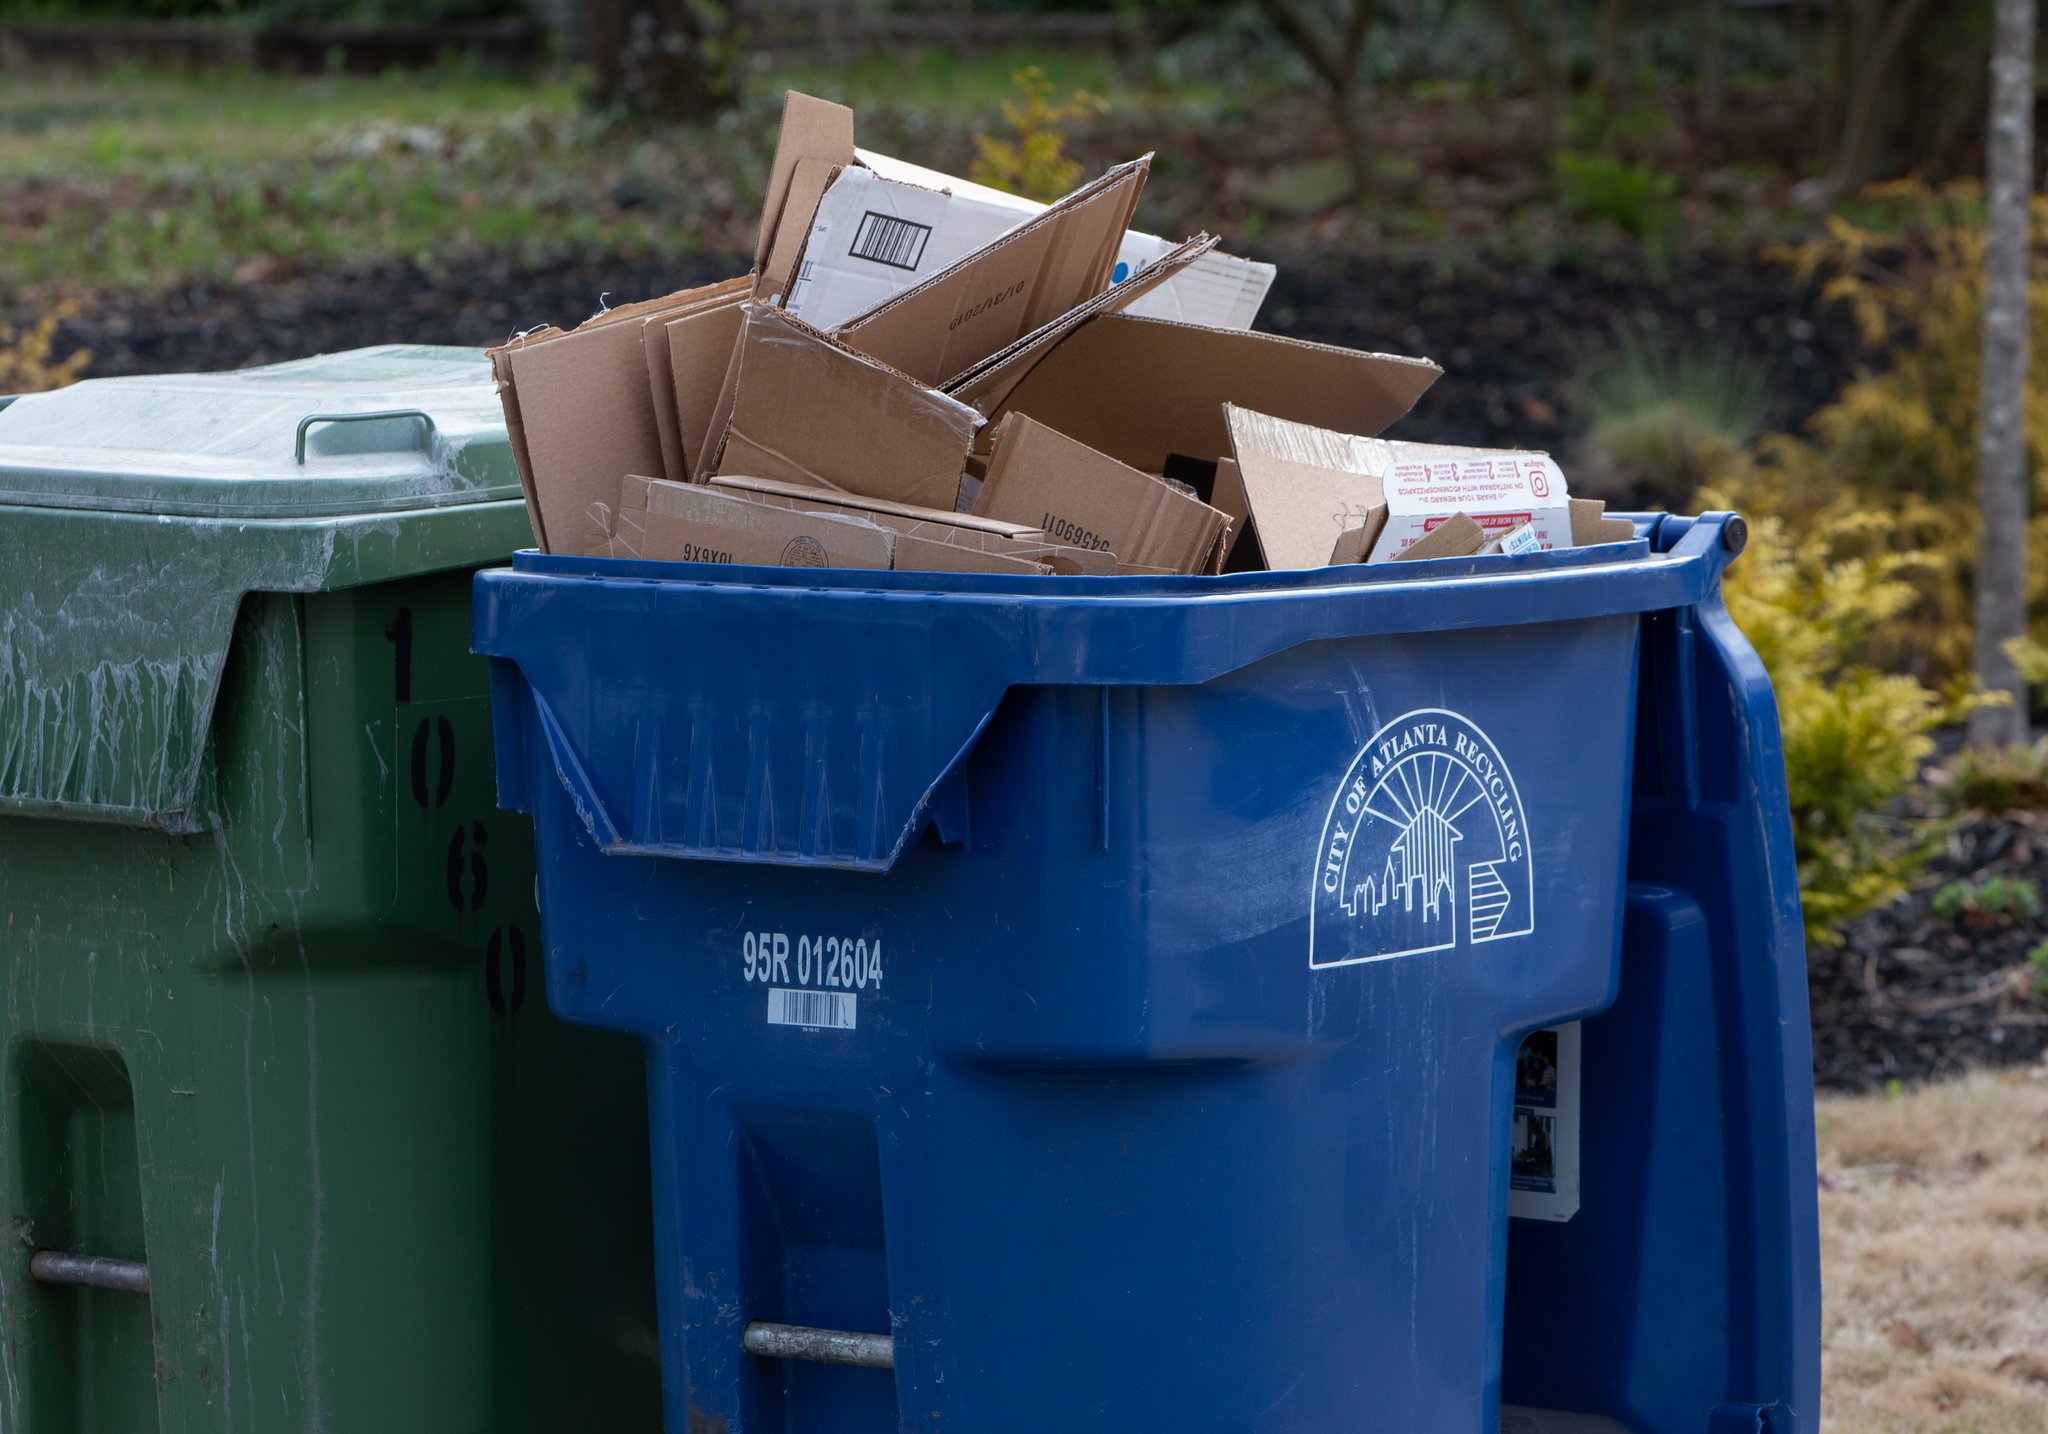 Atlanta recycling pickup schedule: No collection this week